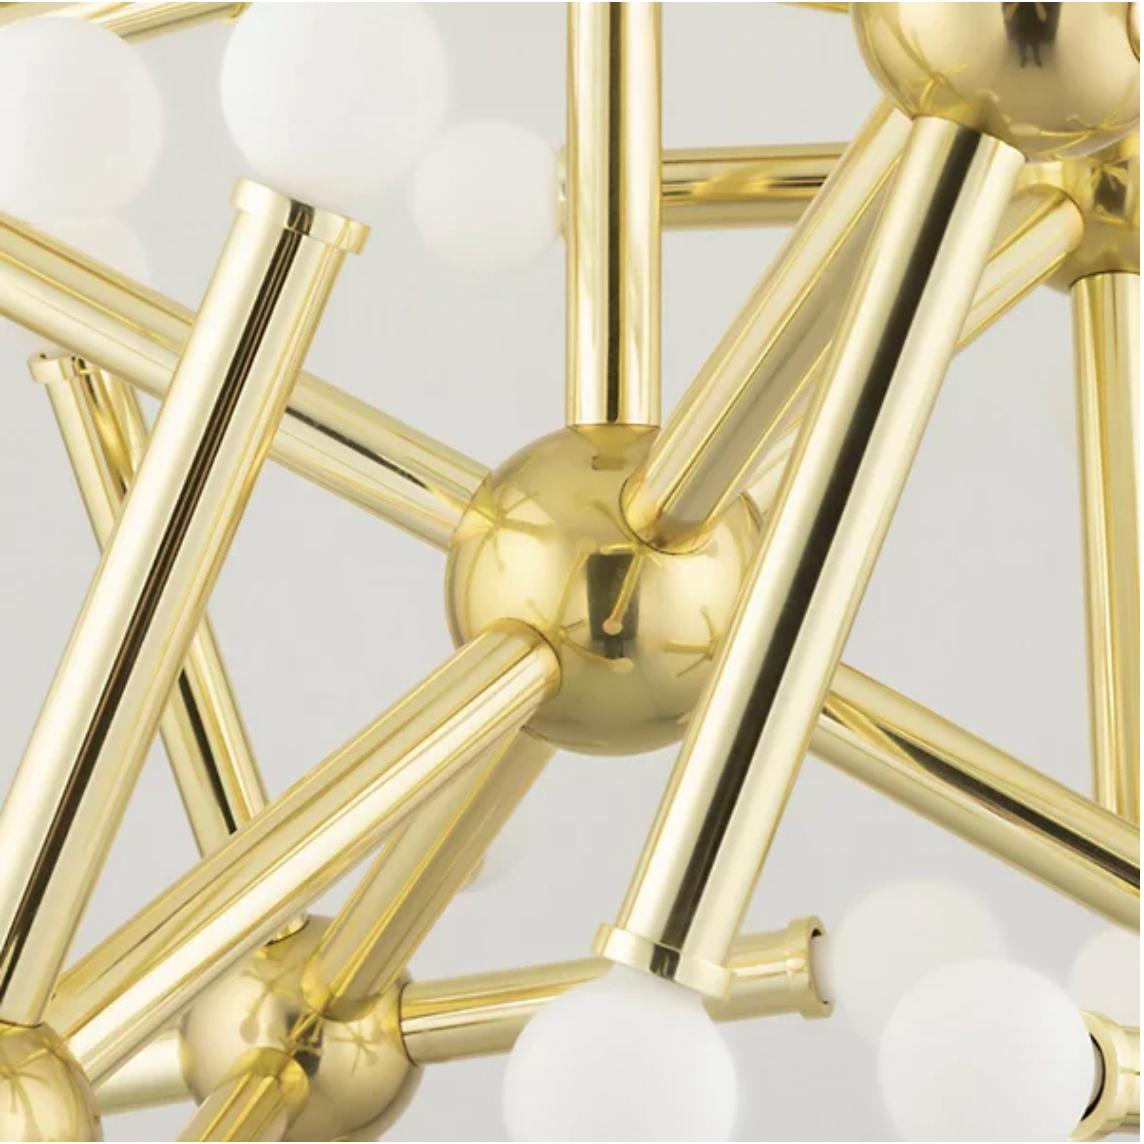 Martyn Lawrence Bullard for Corbett Lighting
Transitionally styled and inspired by mid-century modern design
Features vintage polished brass metalwork, glass shade diffusers at the end of each tip for pleasant illumination, and an unmistakable